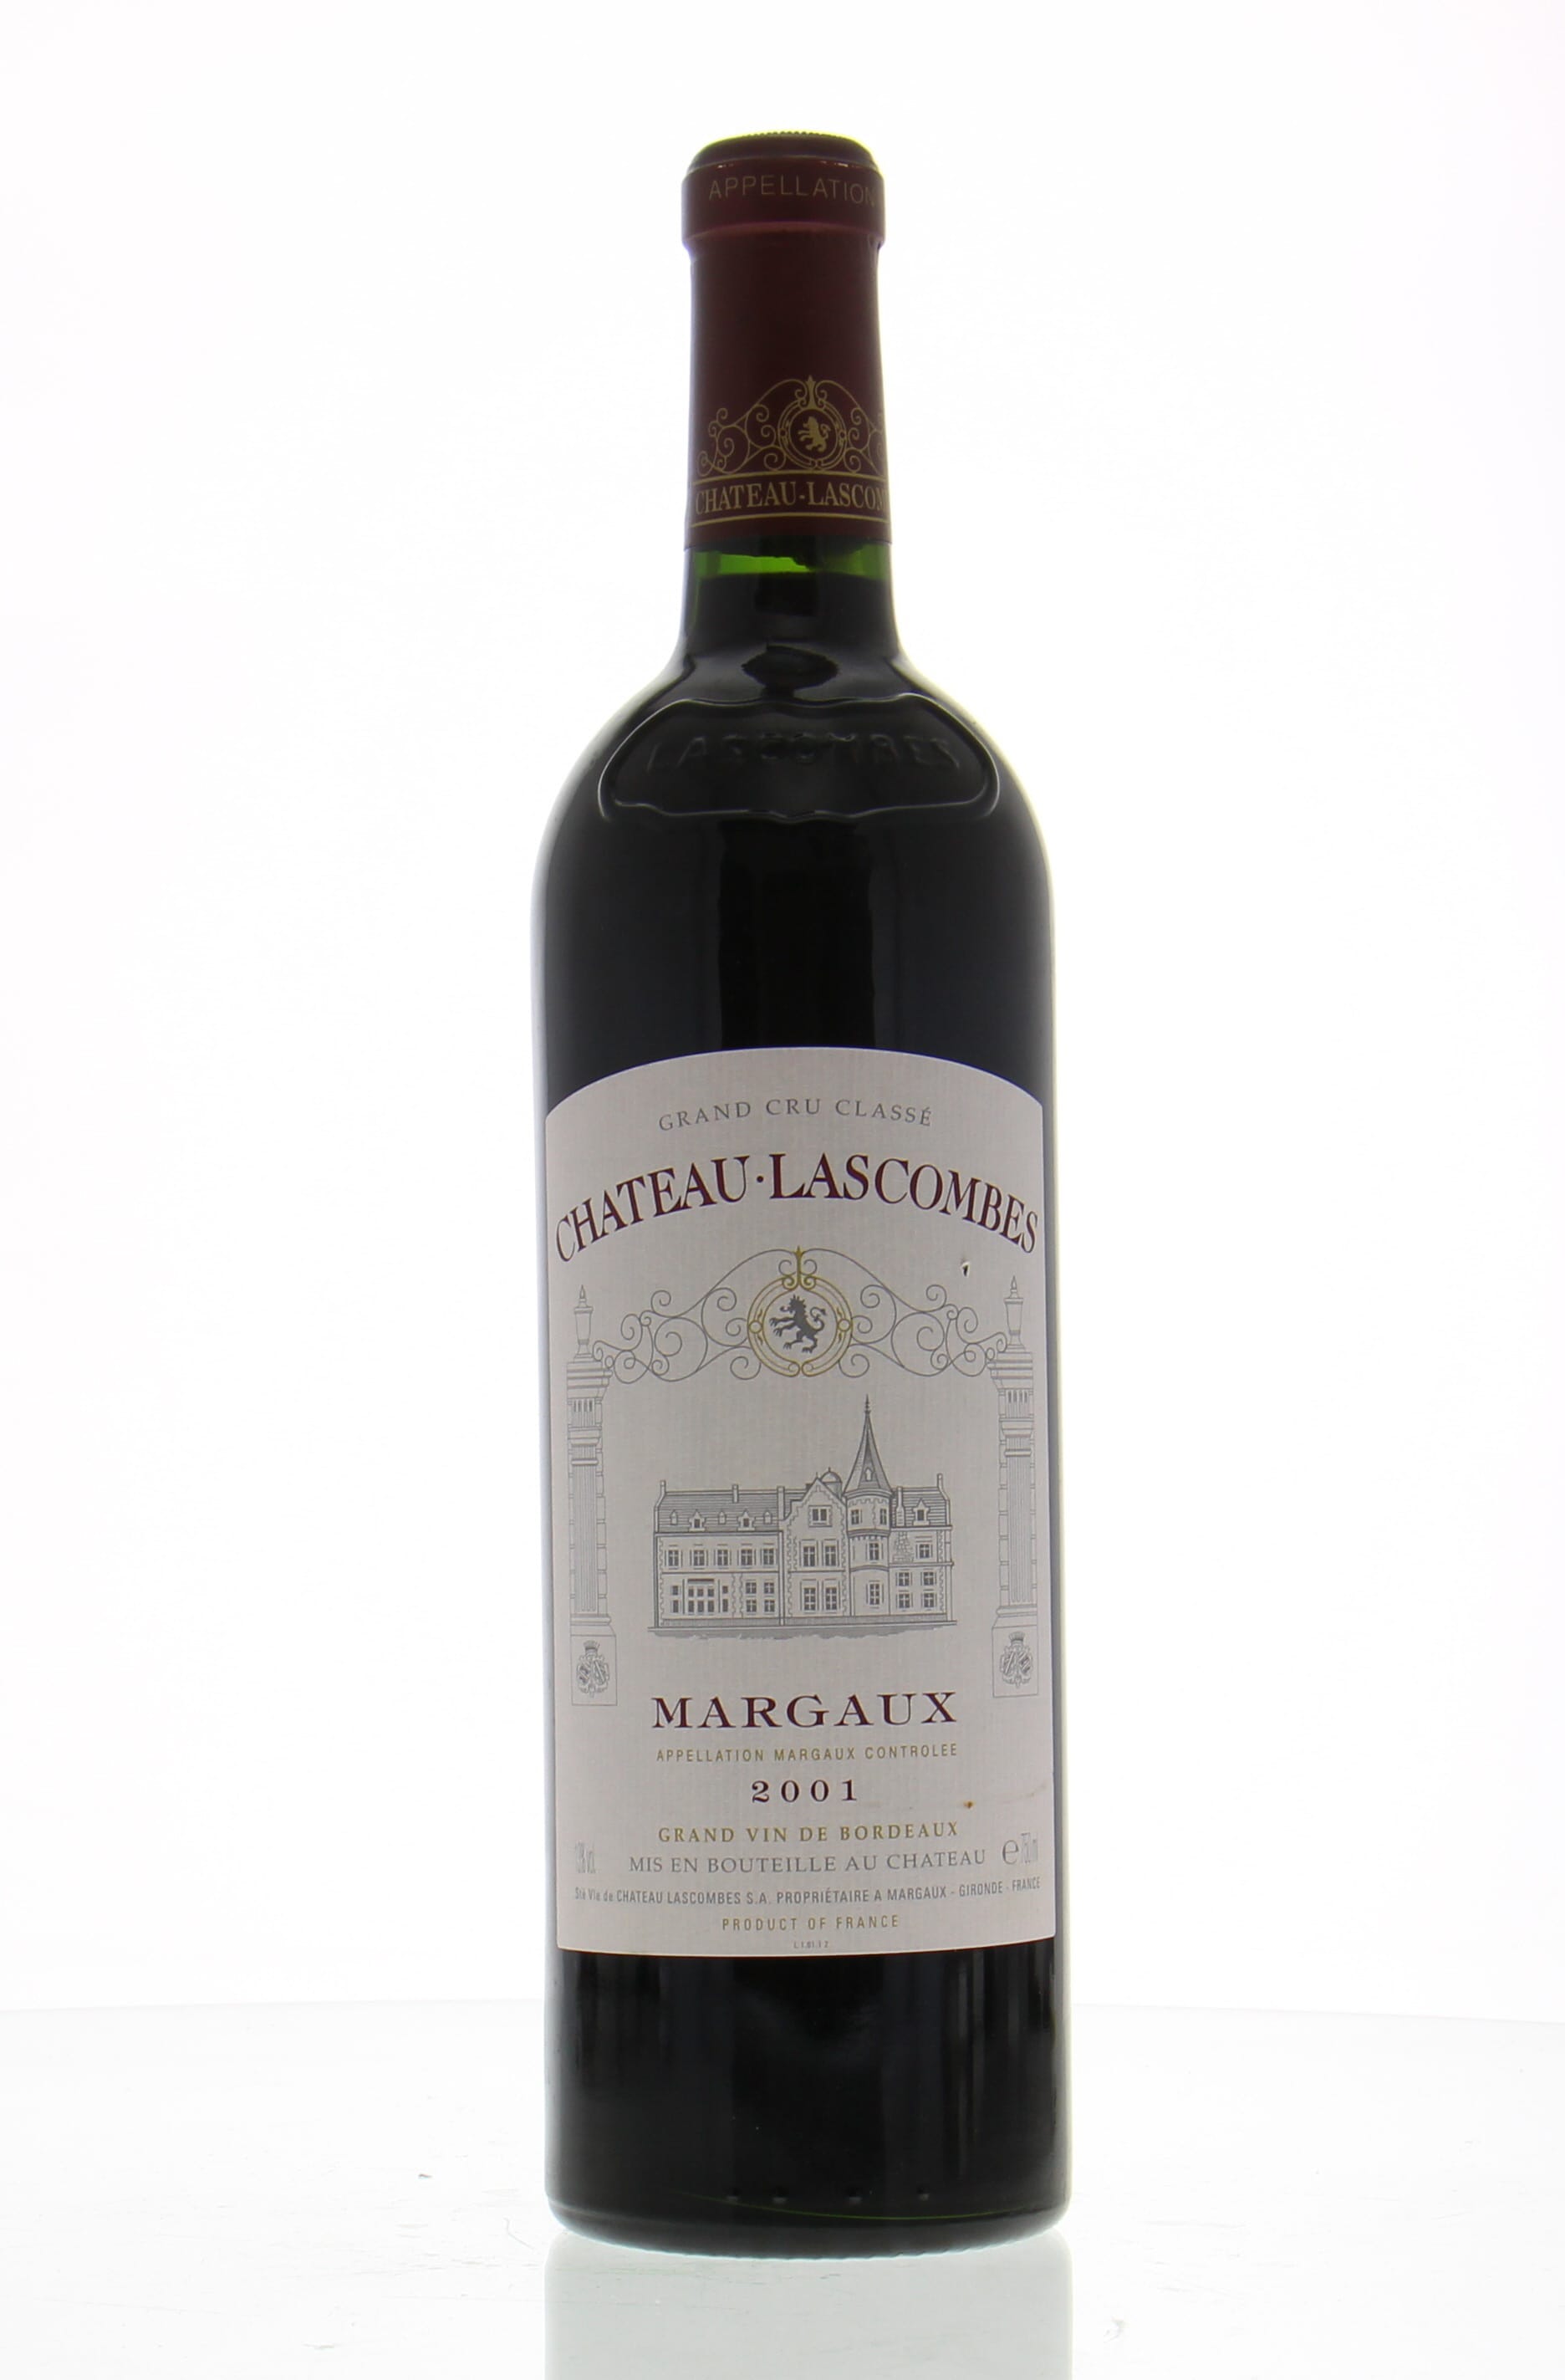 Chateau Lascombes - Chateau Lascombes 2001